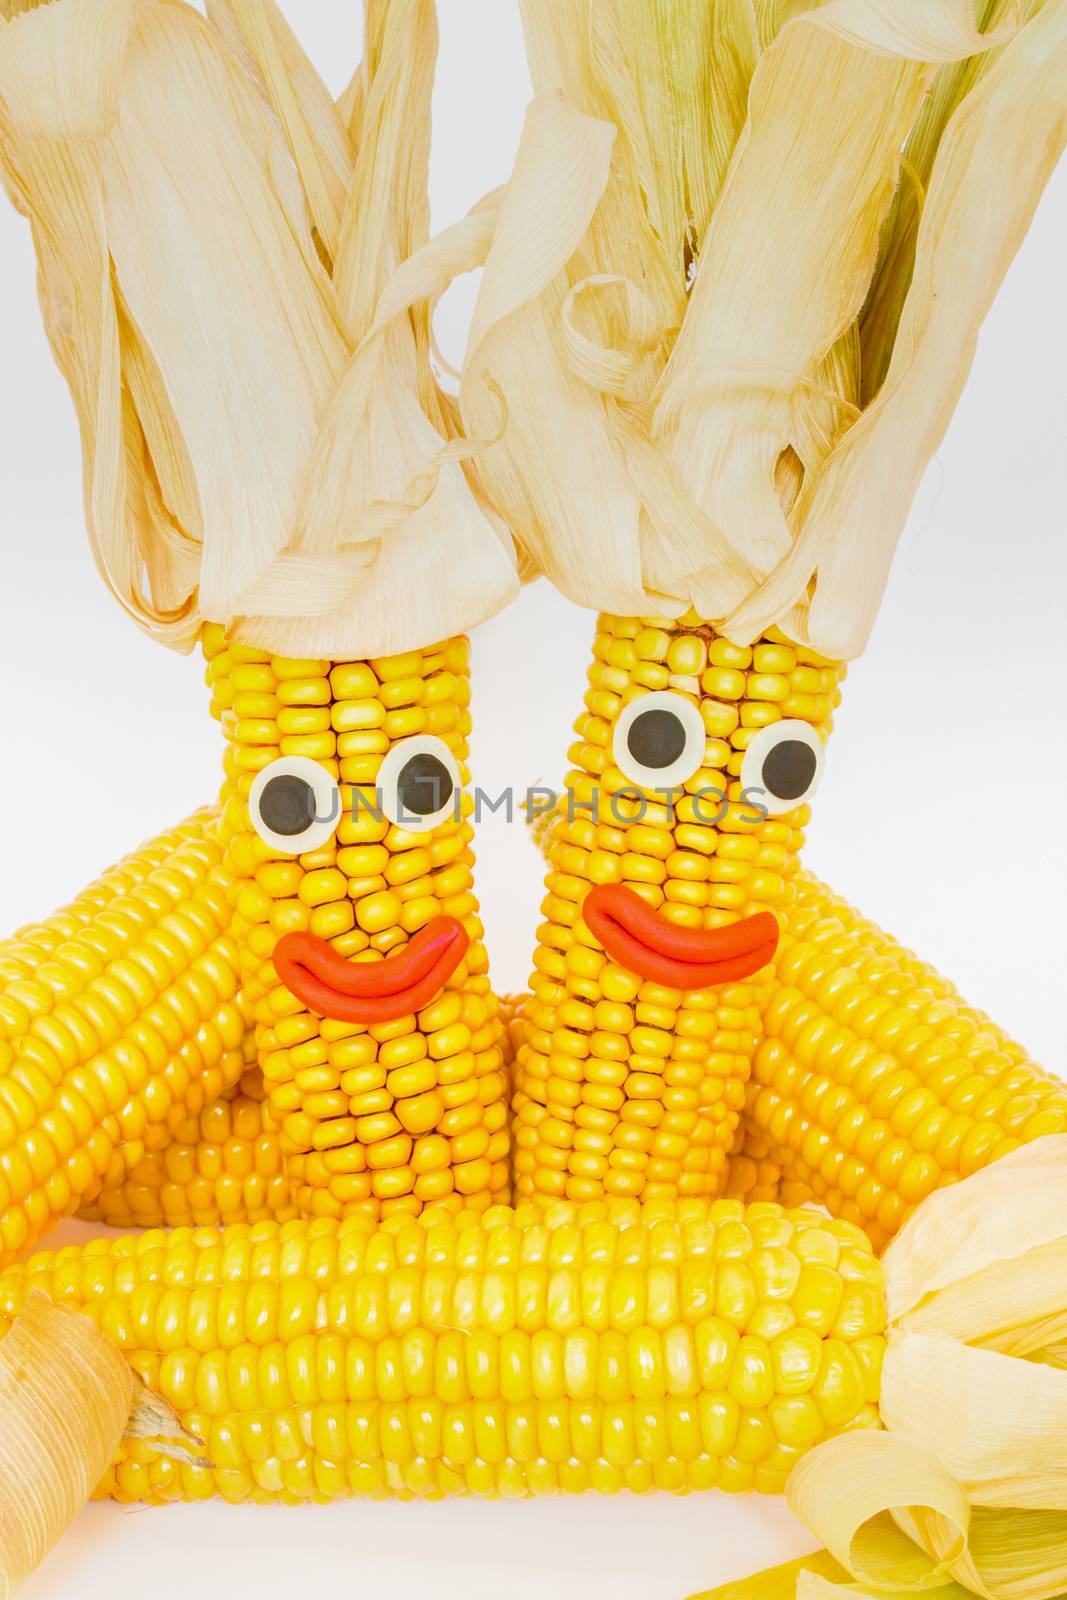 Corncobs with eyes and mouth by BenSchonewille